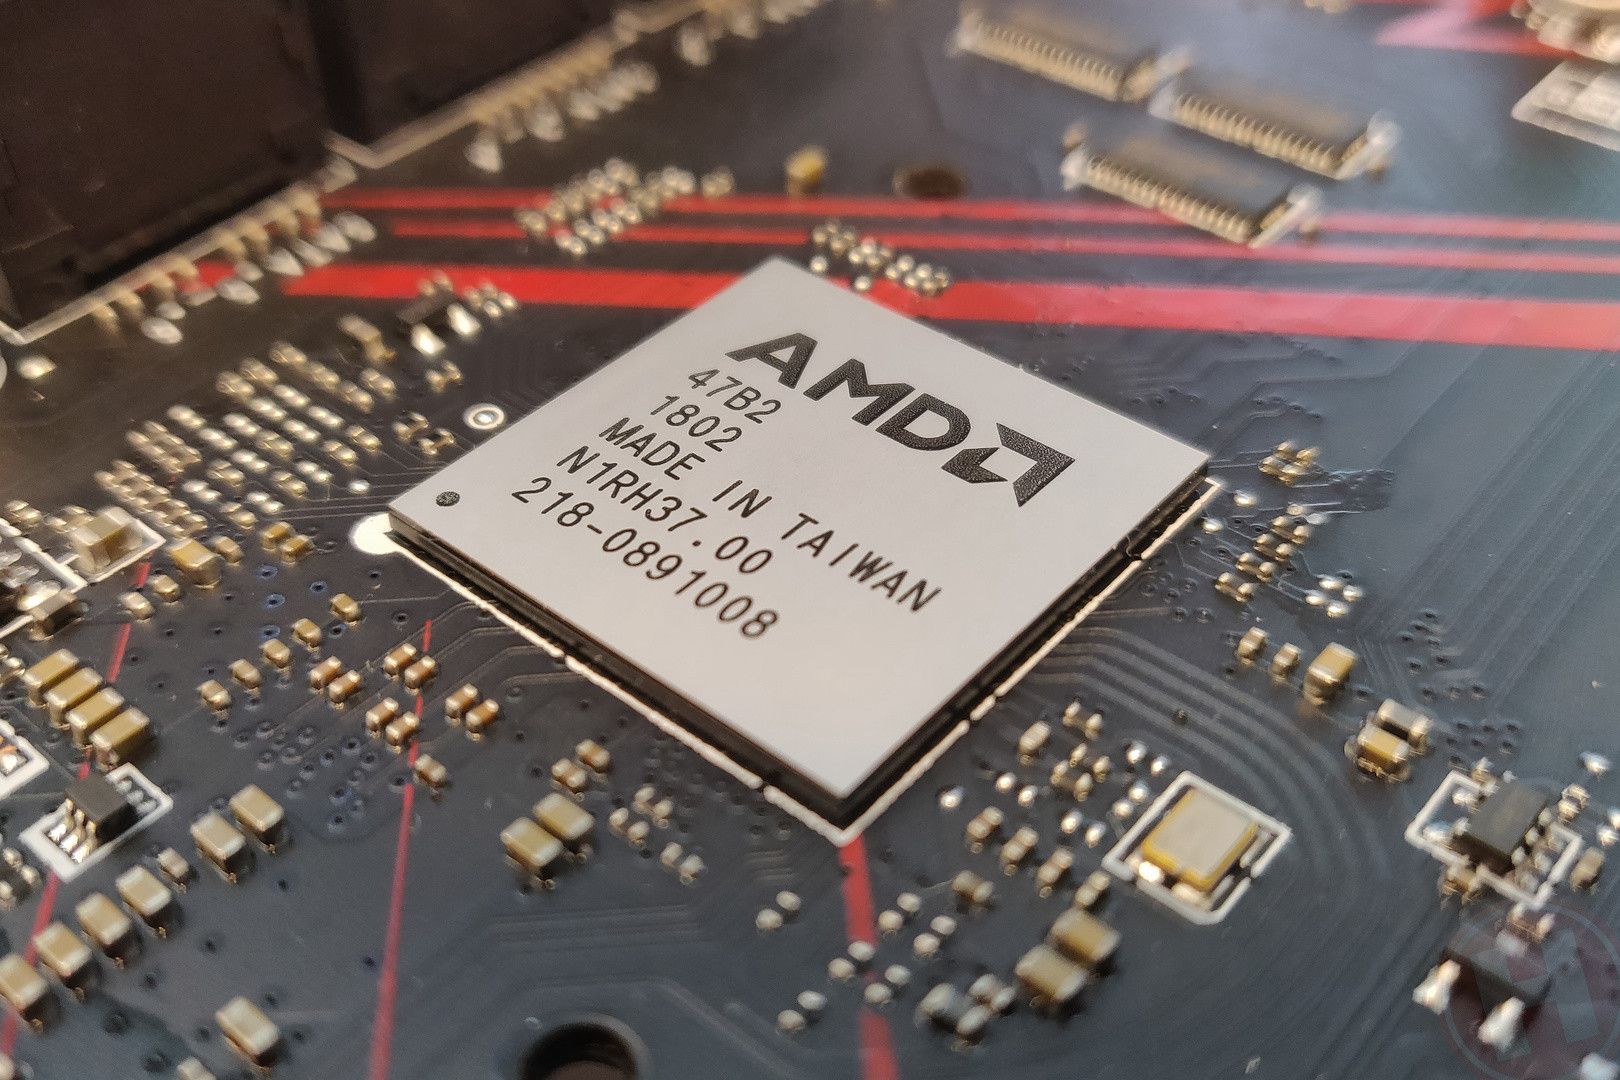 AMD gained hundred percent on the stock market in a year as of the second quarter of 2019